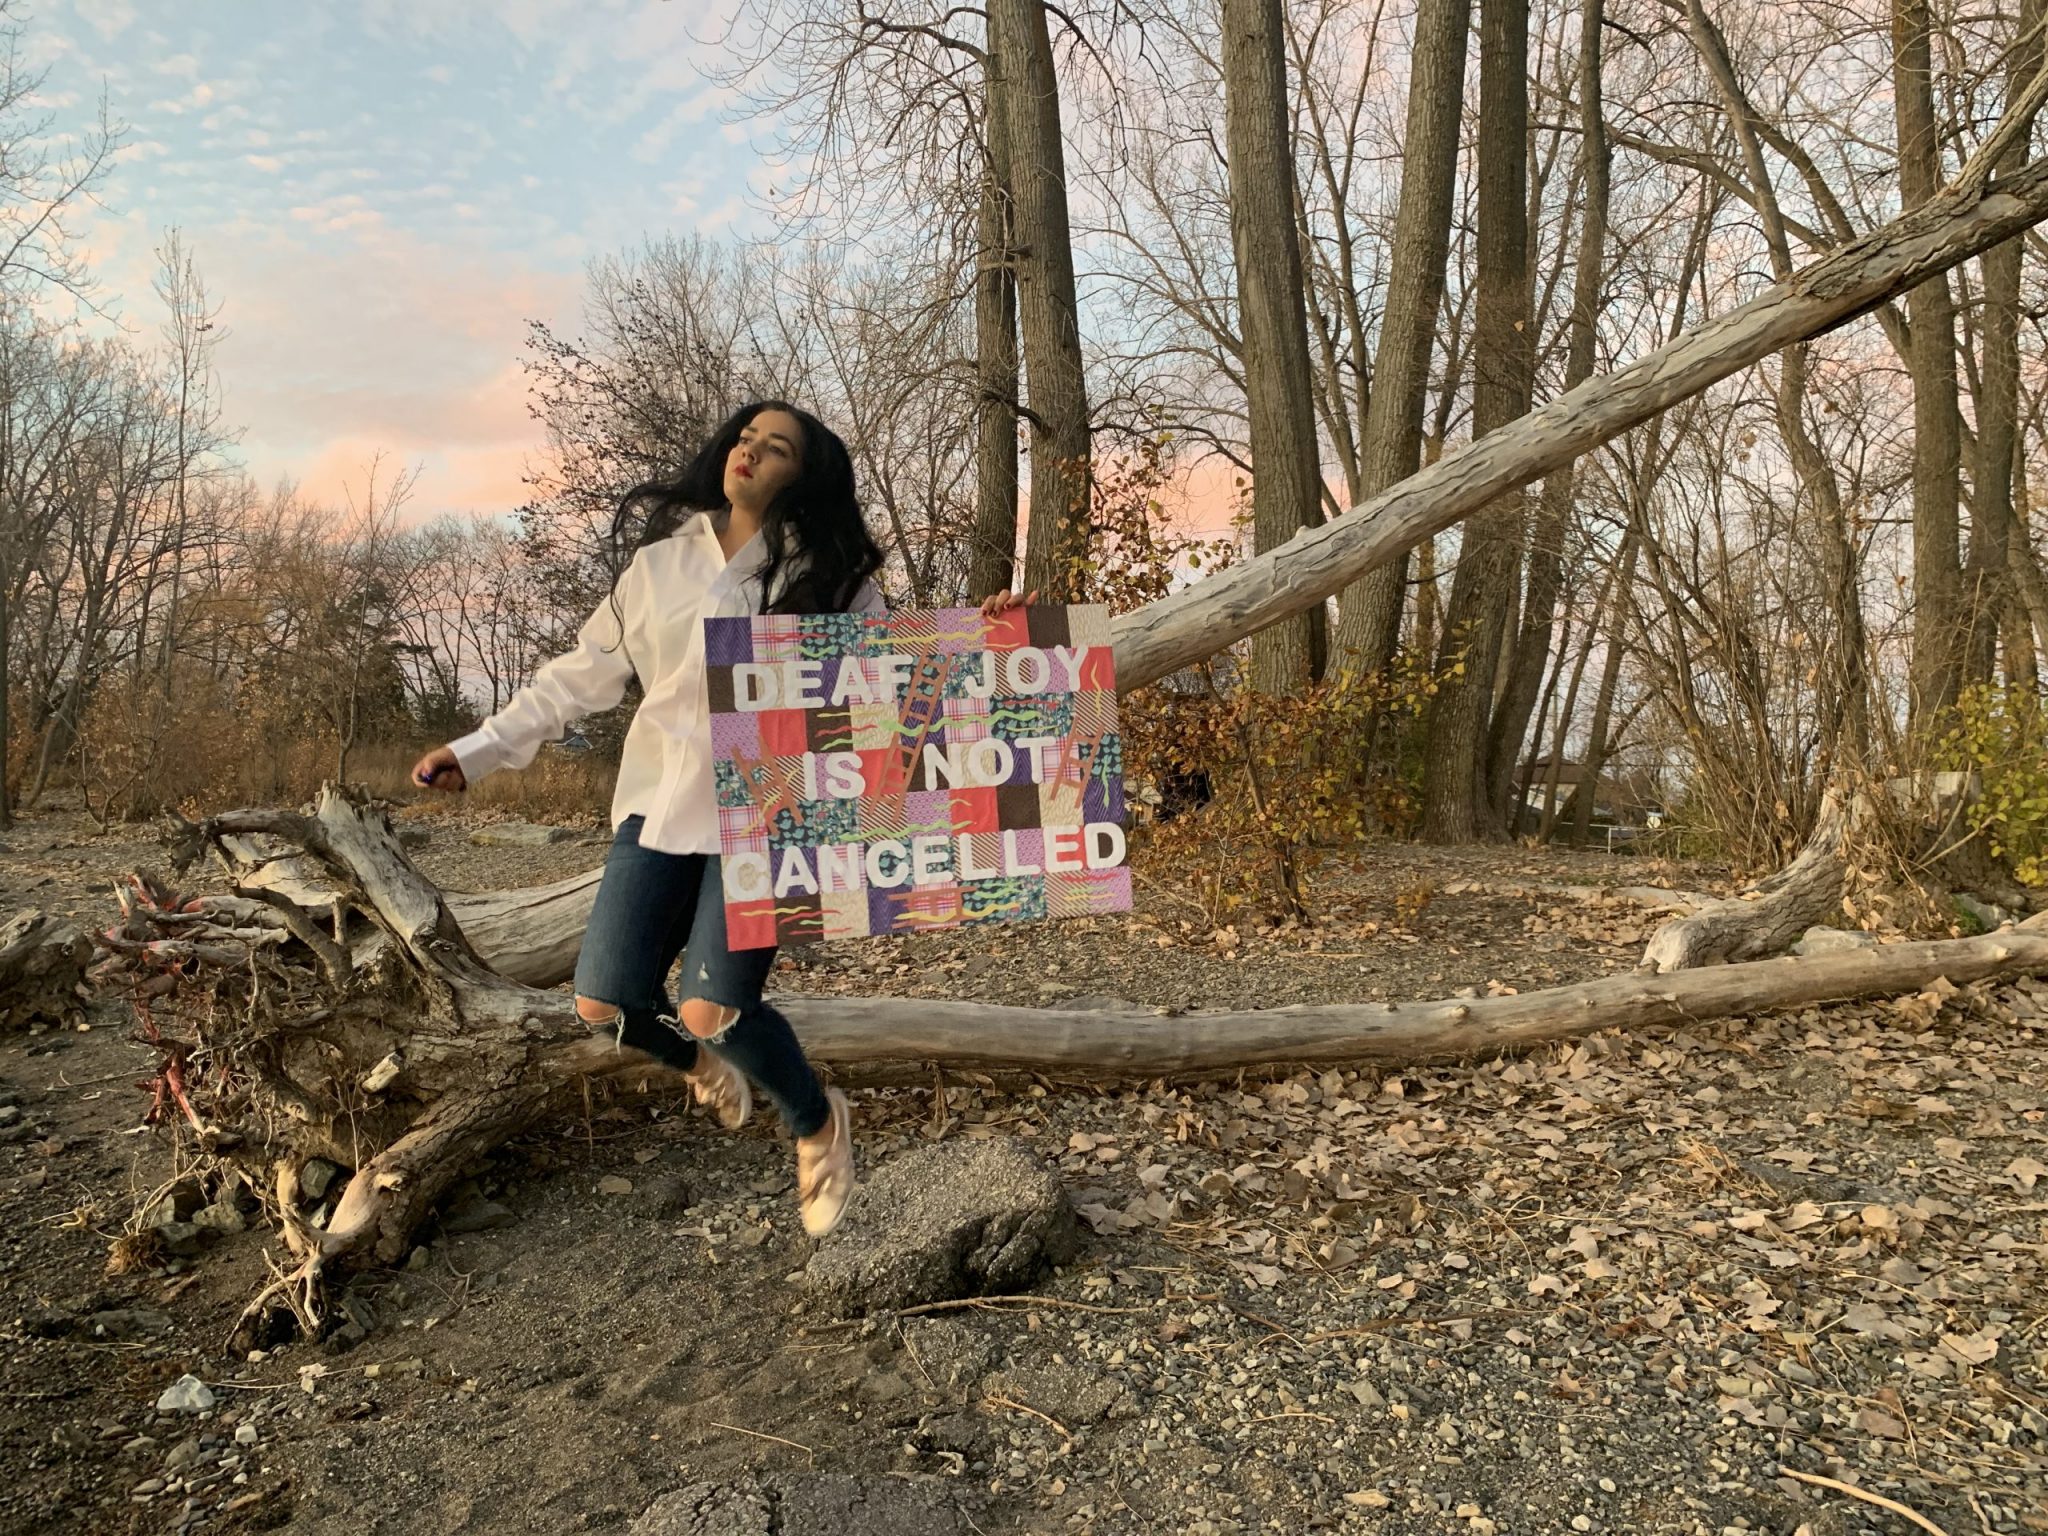 Photograph of Syra Hassan in the middle of a jump in a wooded area. In her right hand, she holds a camera remote control and in her left hand, a cardboard-sized sign decorated with a single hand that reads "Deaf joy is not cancelled"